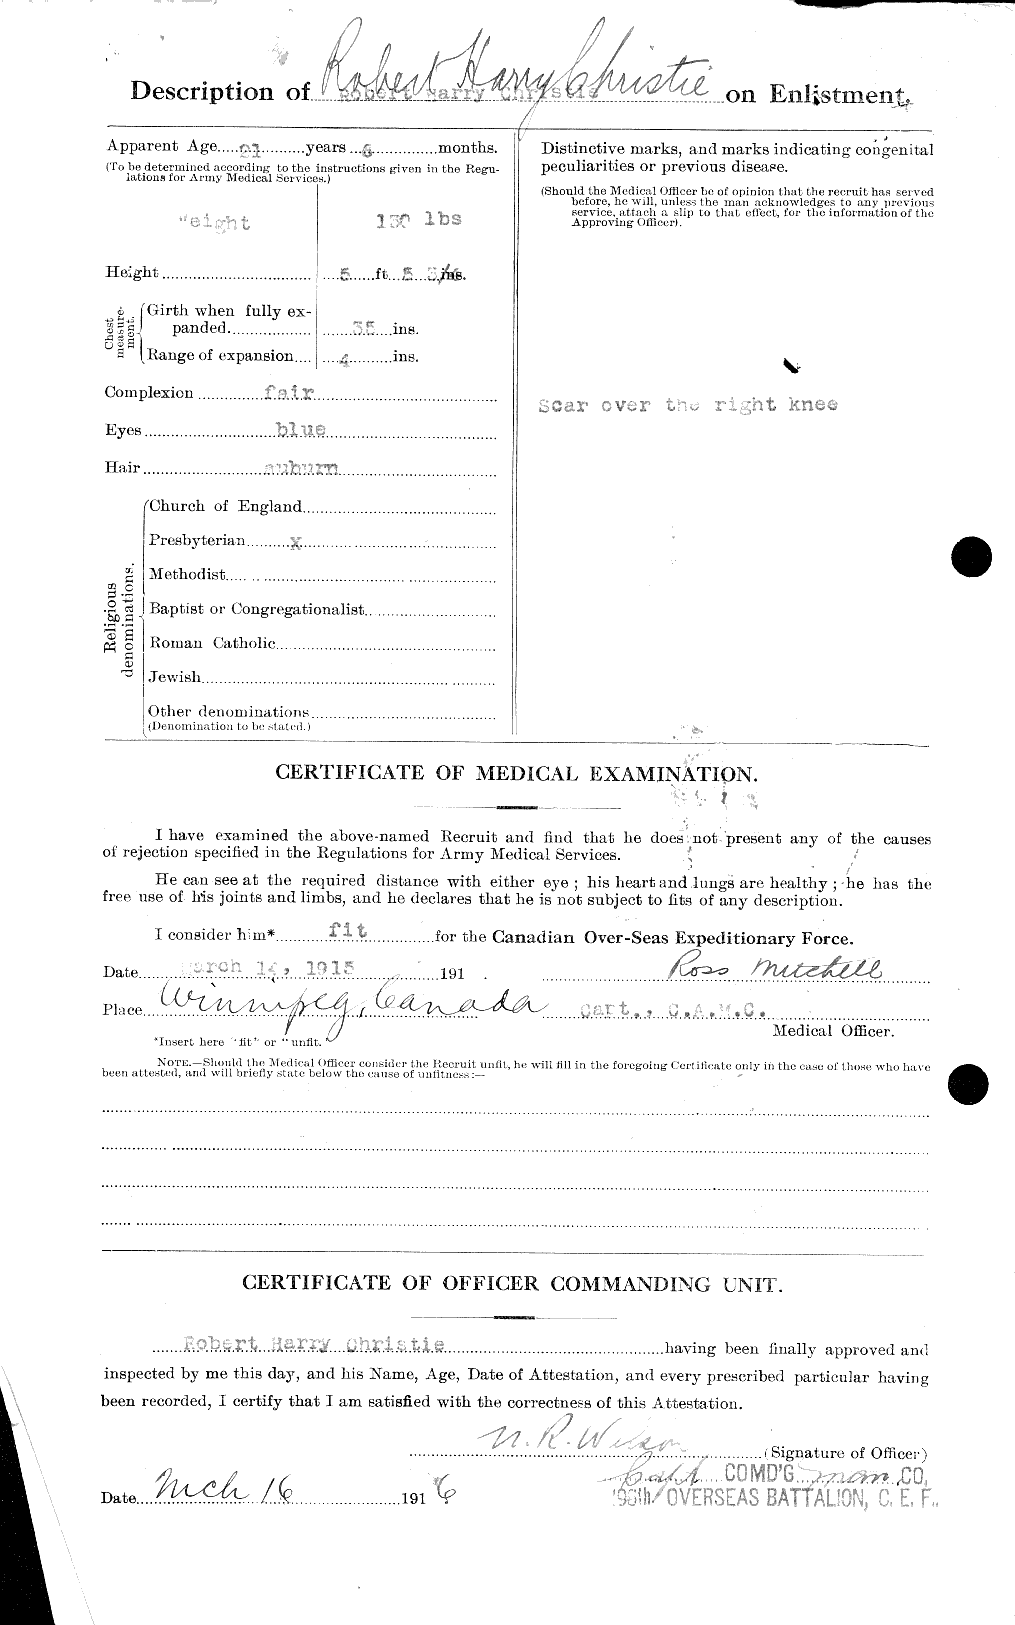 Personnel Records of the First World War - CEF 022054b